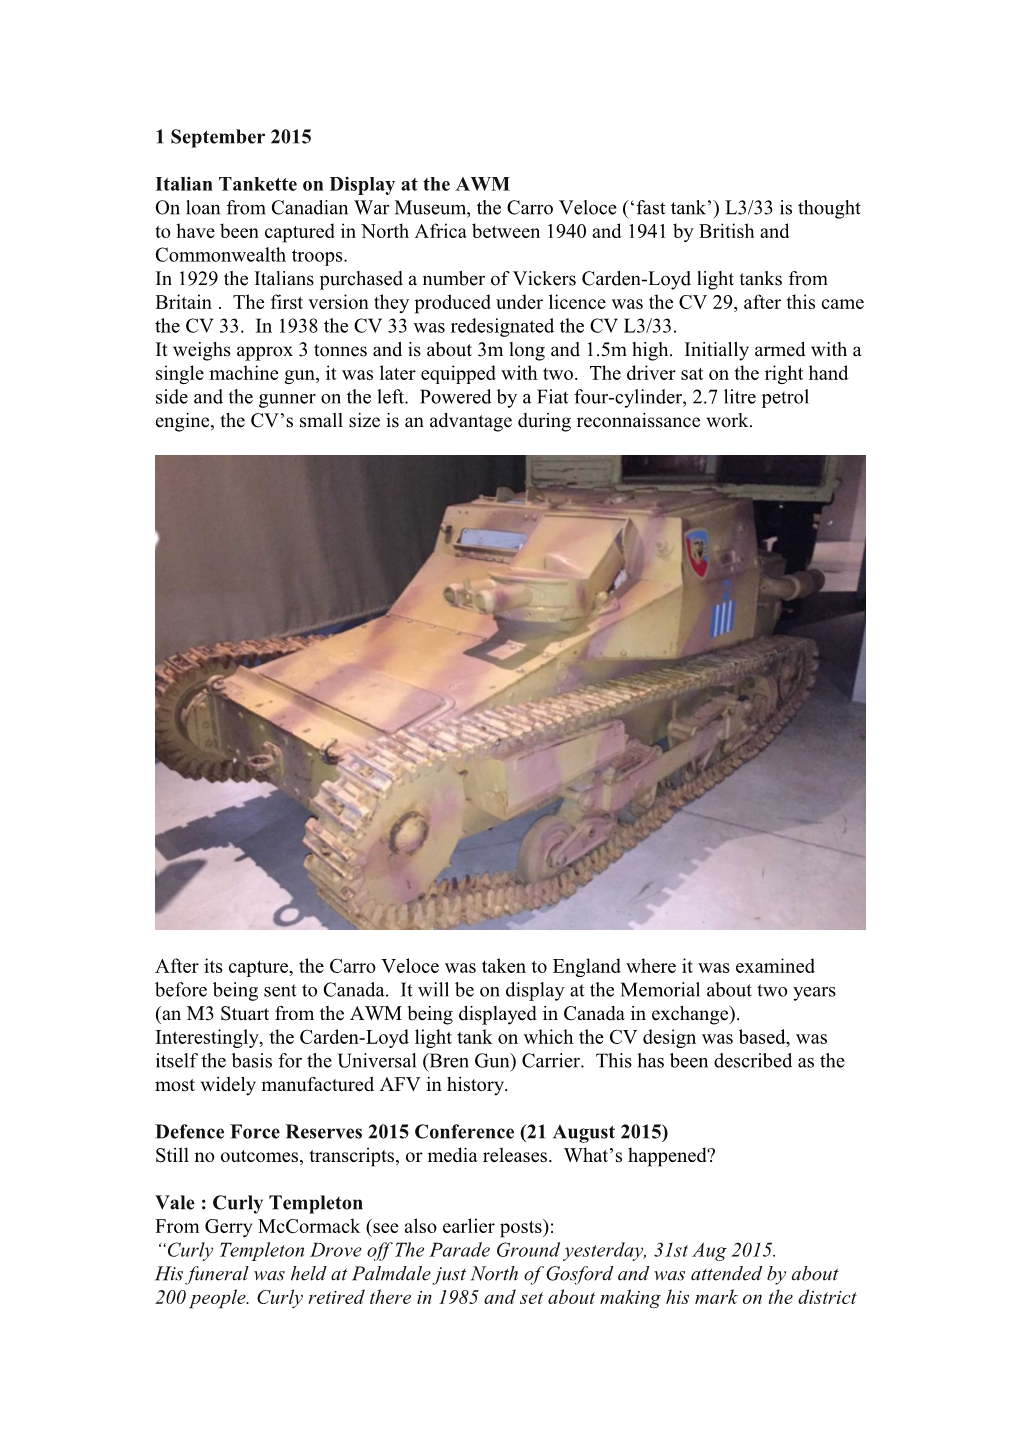 Italian Tankette on Display at the AWM